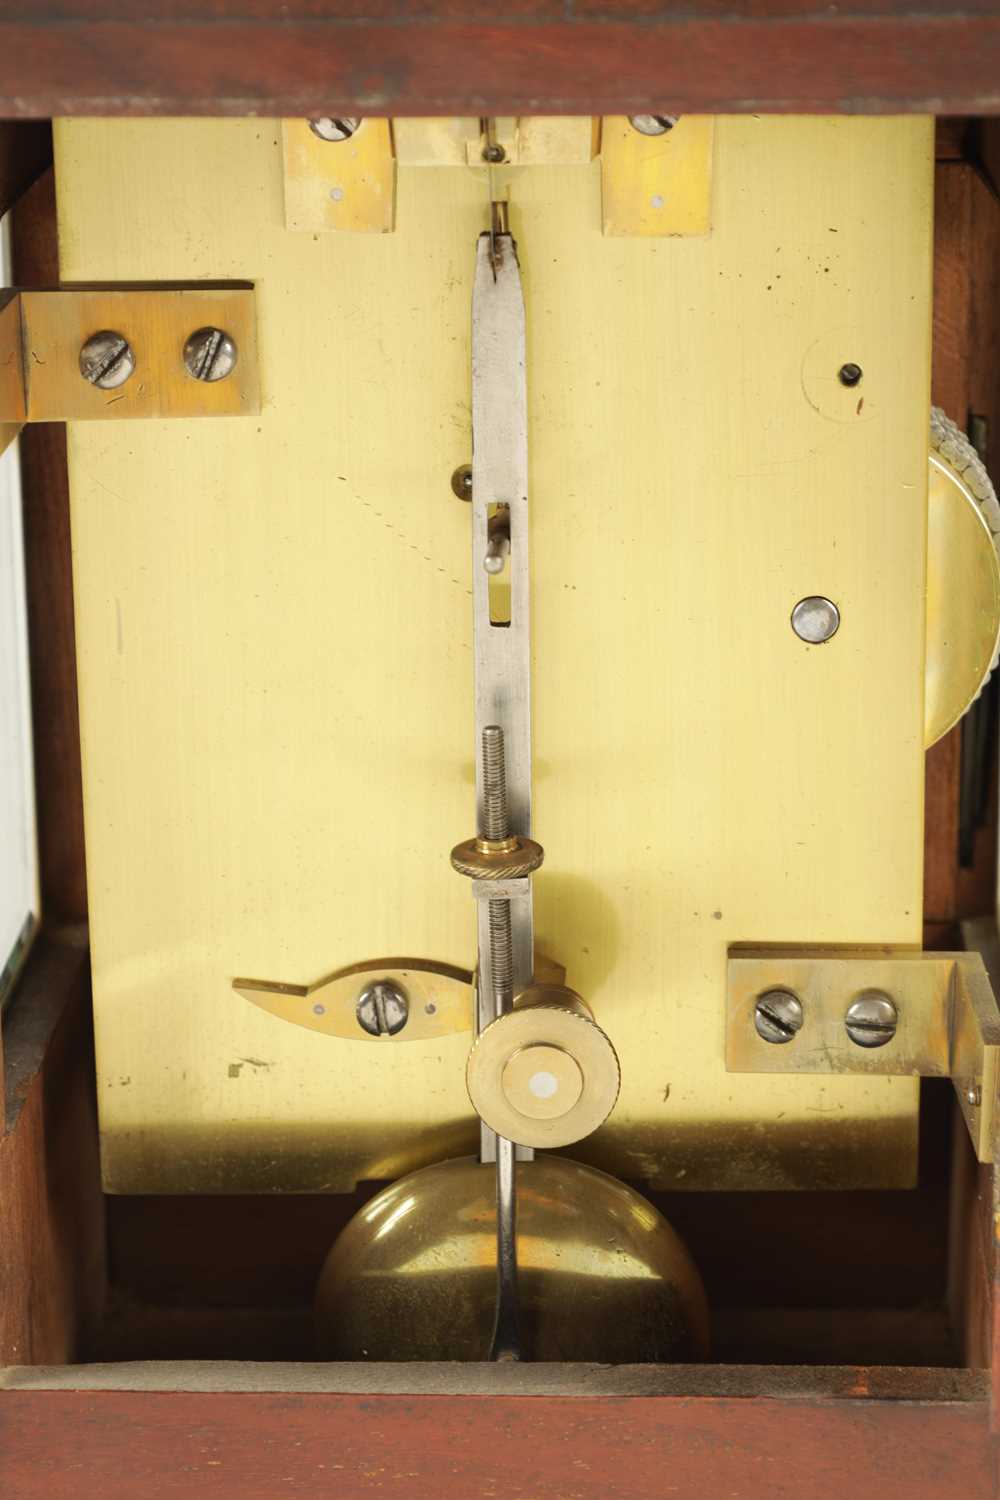 JASON BANNISTER, LONDON. A SMALL MID 19TH CENTURY ENGLISH FUSEE MANTEL CLOCK - Image 5 of 6